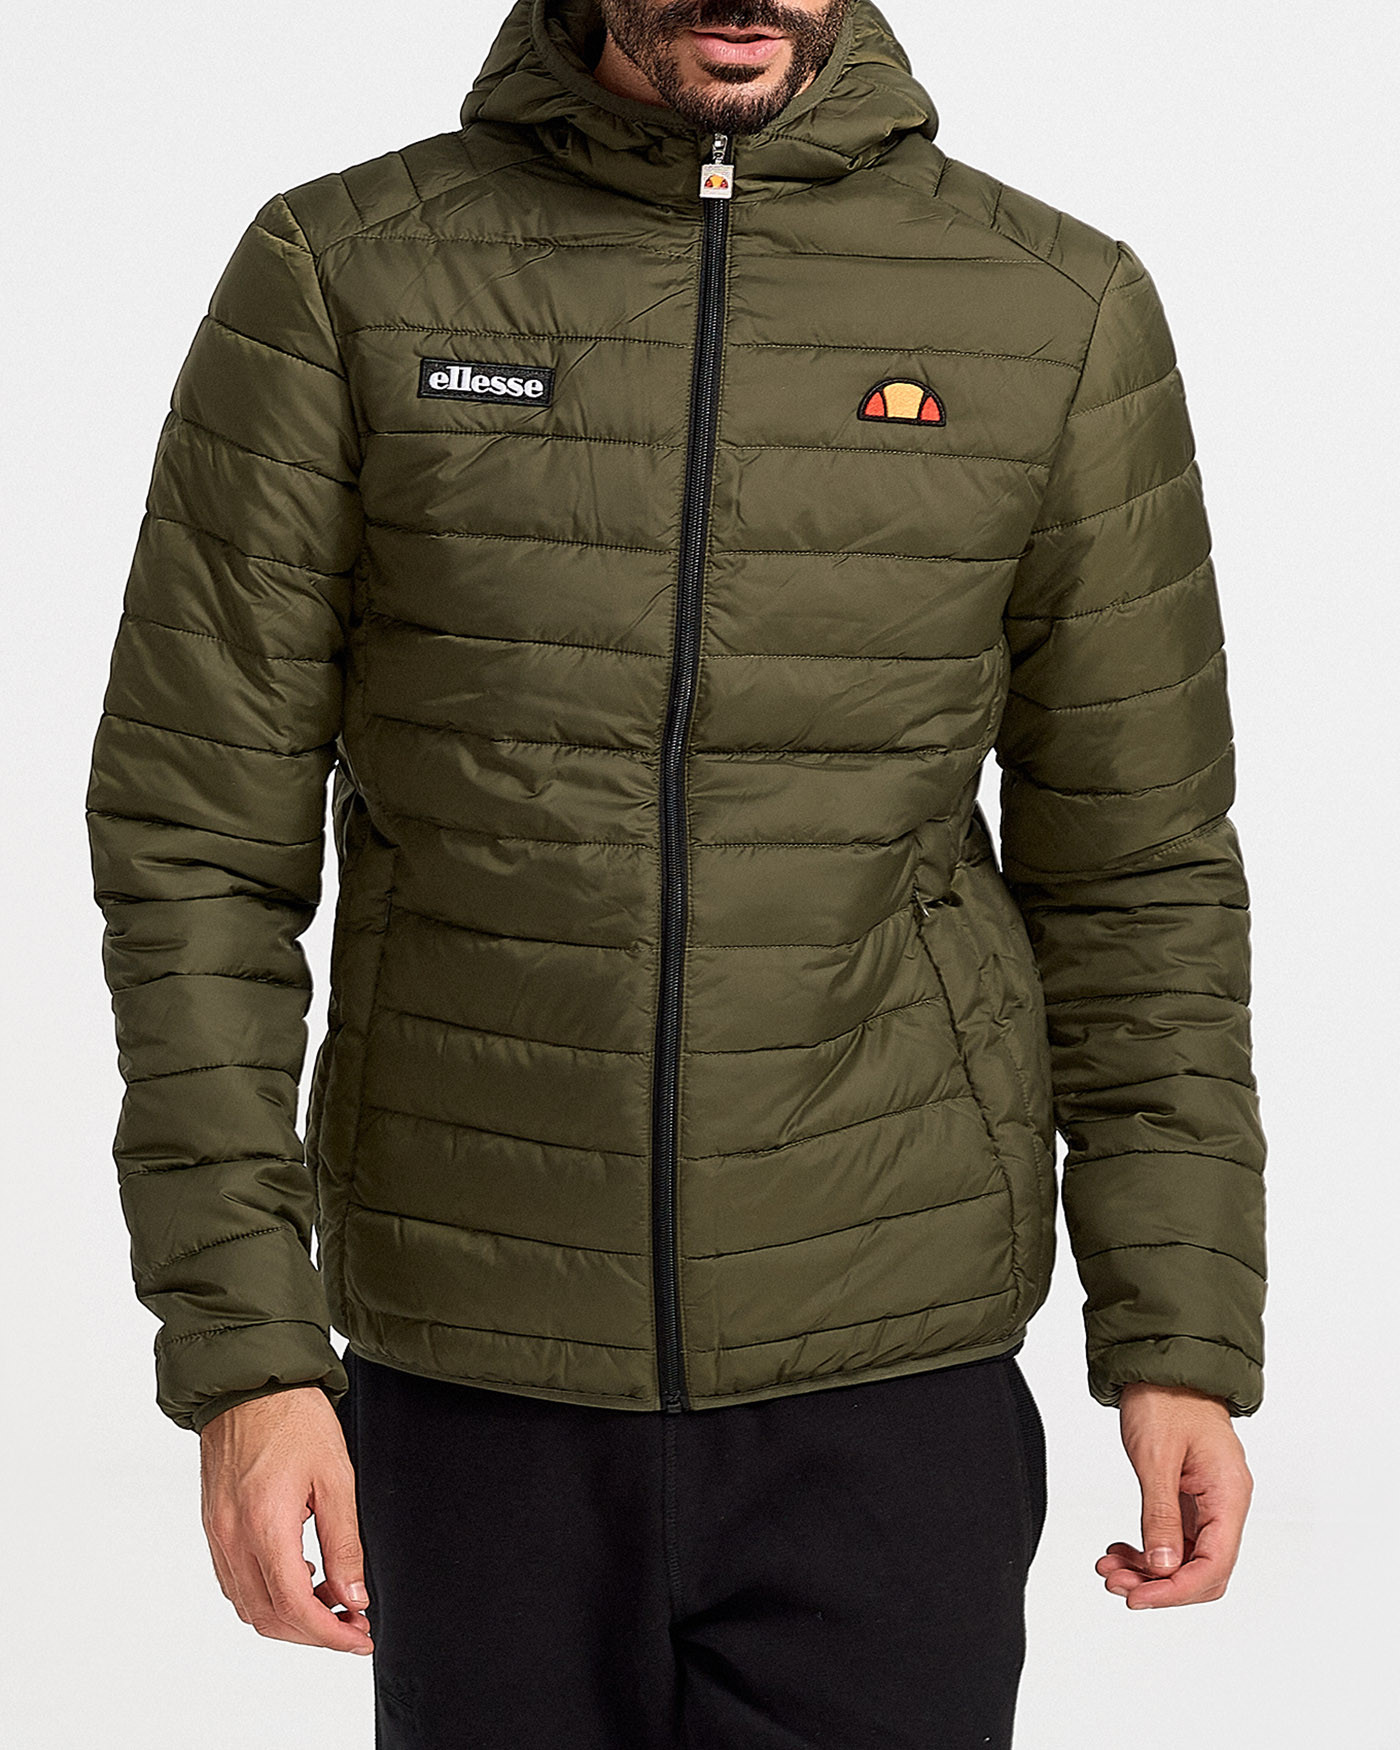 ELLESSE ΜΕΝ'S PUFFER JACKET Lombardy - SHS01115 - sagiakos-stores.gr